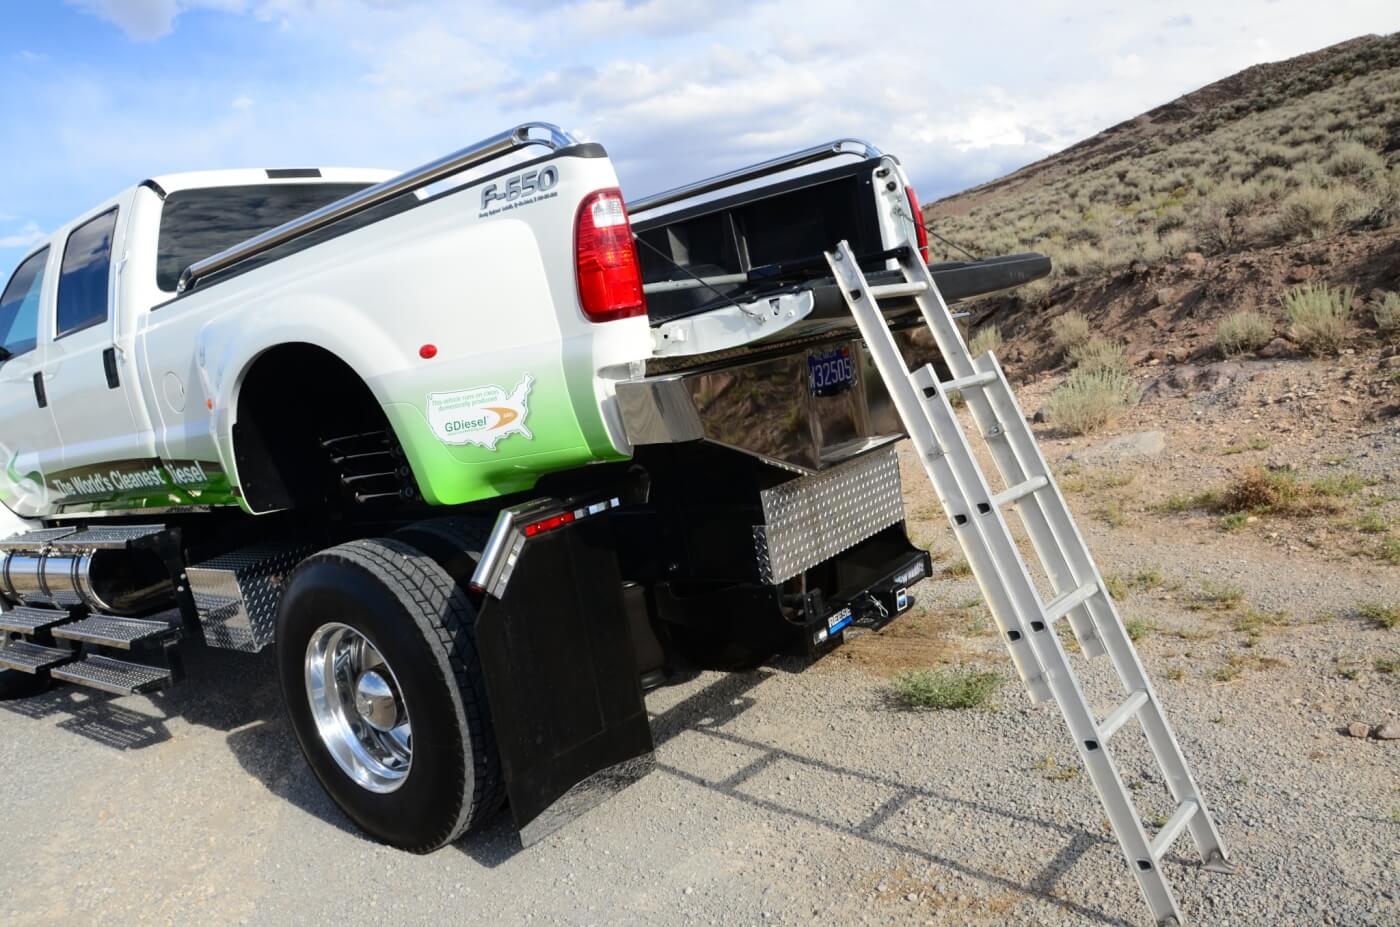 A folding ladder stored on the tailgate provides much-needed access to the pickup bed, which is nearly a foot above the main frame rails.